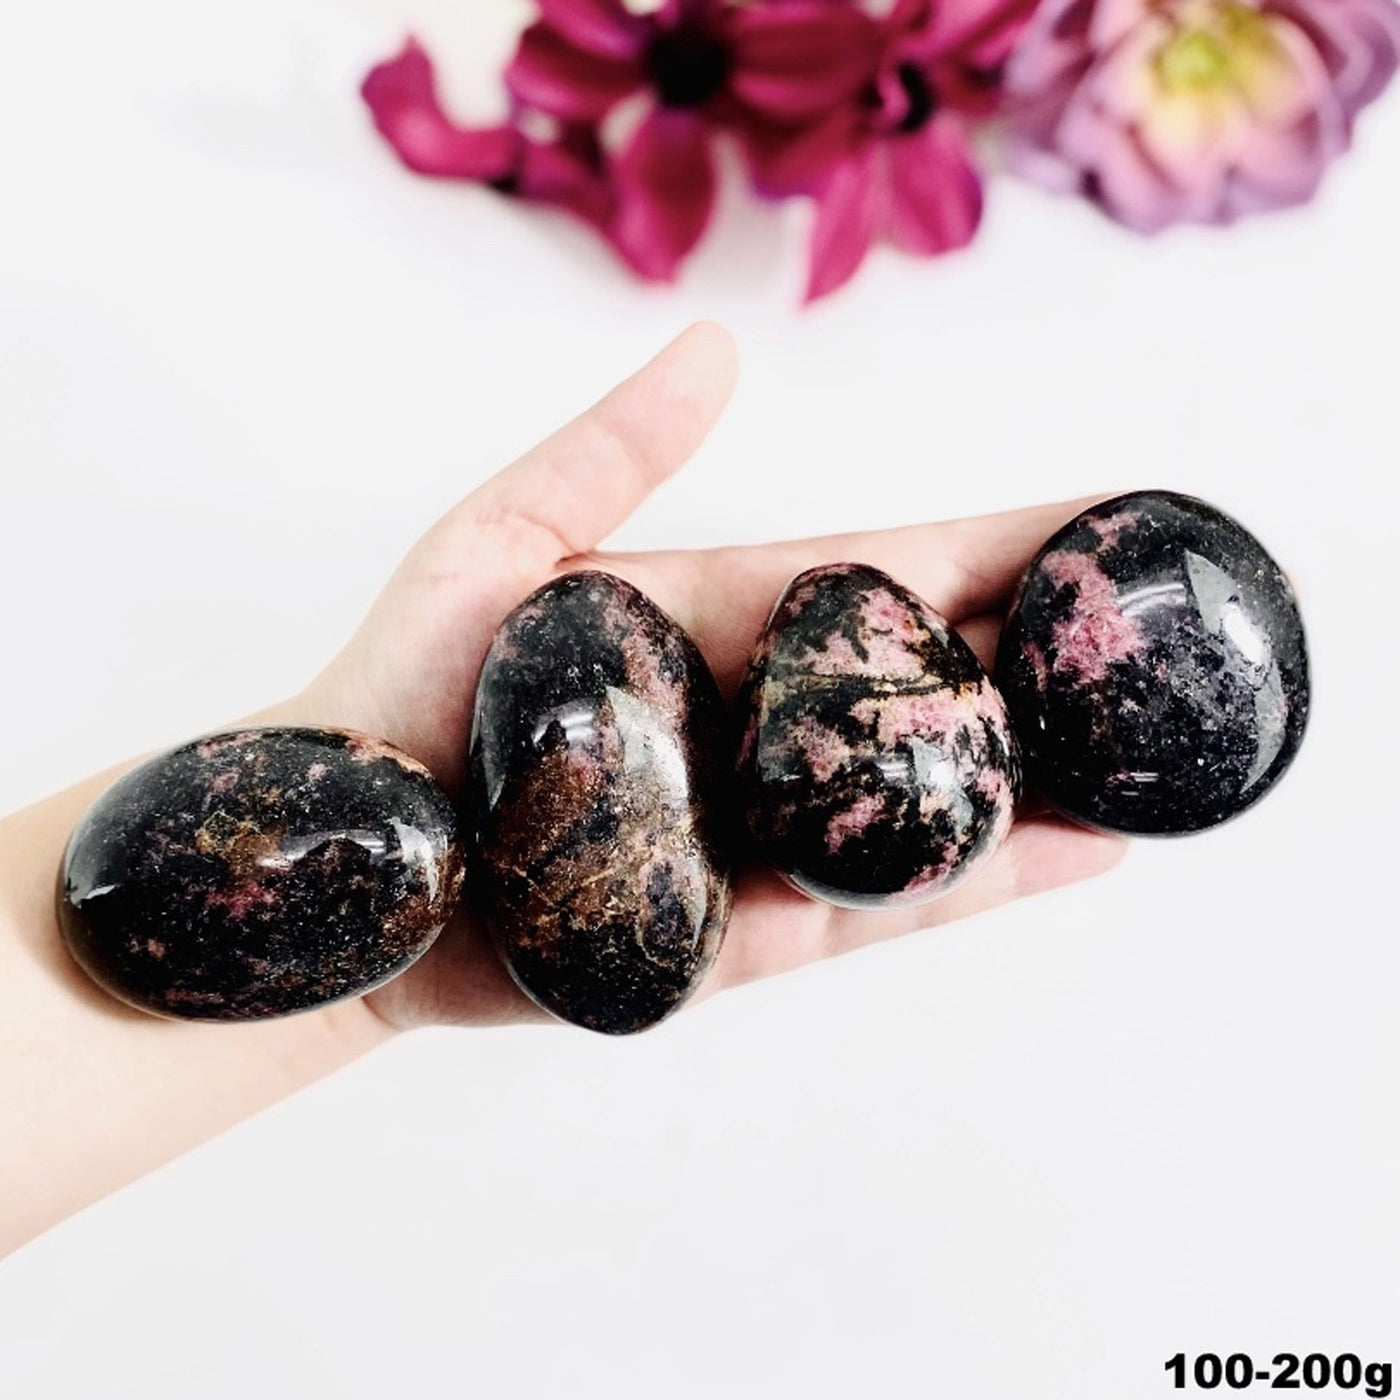 Hand holding up 100-200g Rhodonite Palm Stones with flowers blurred on white background